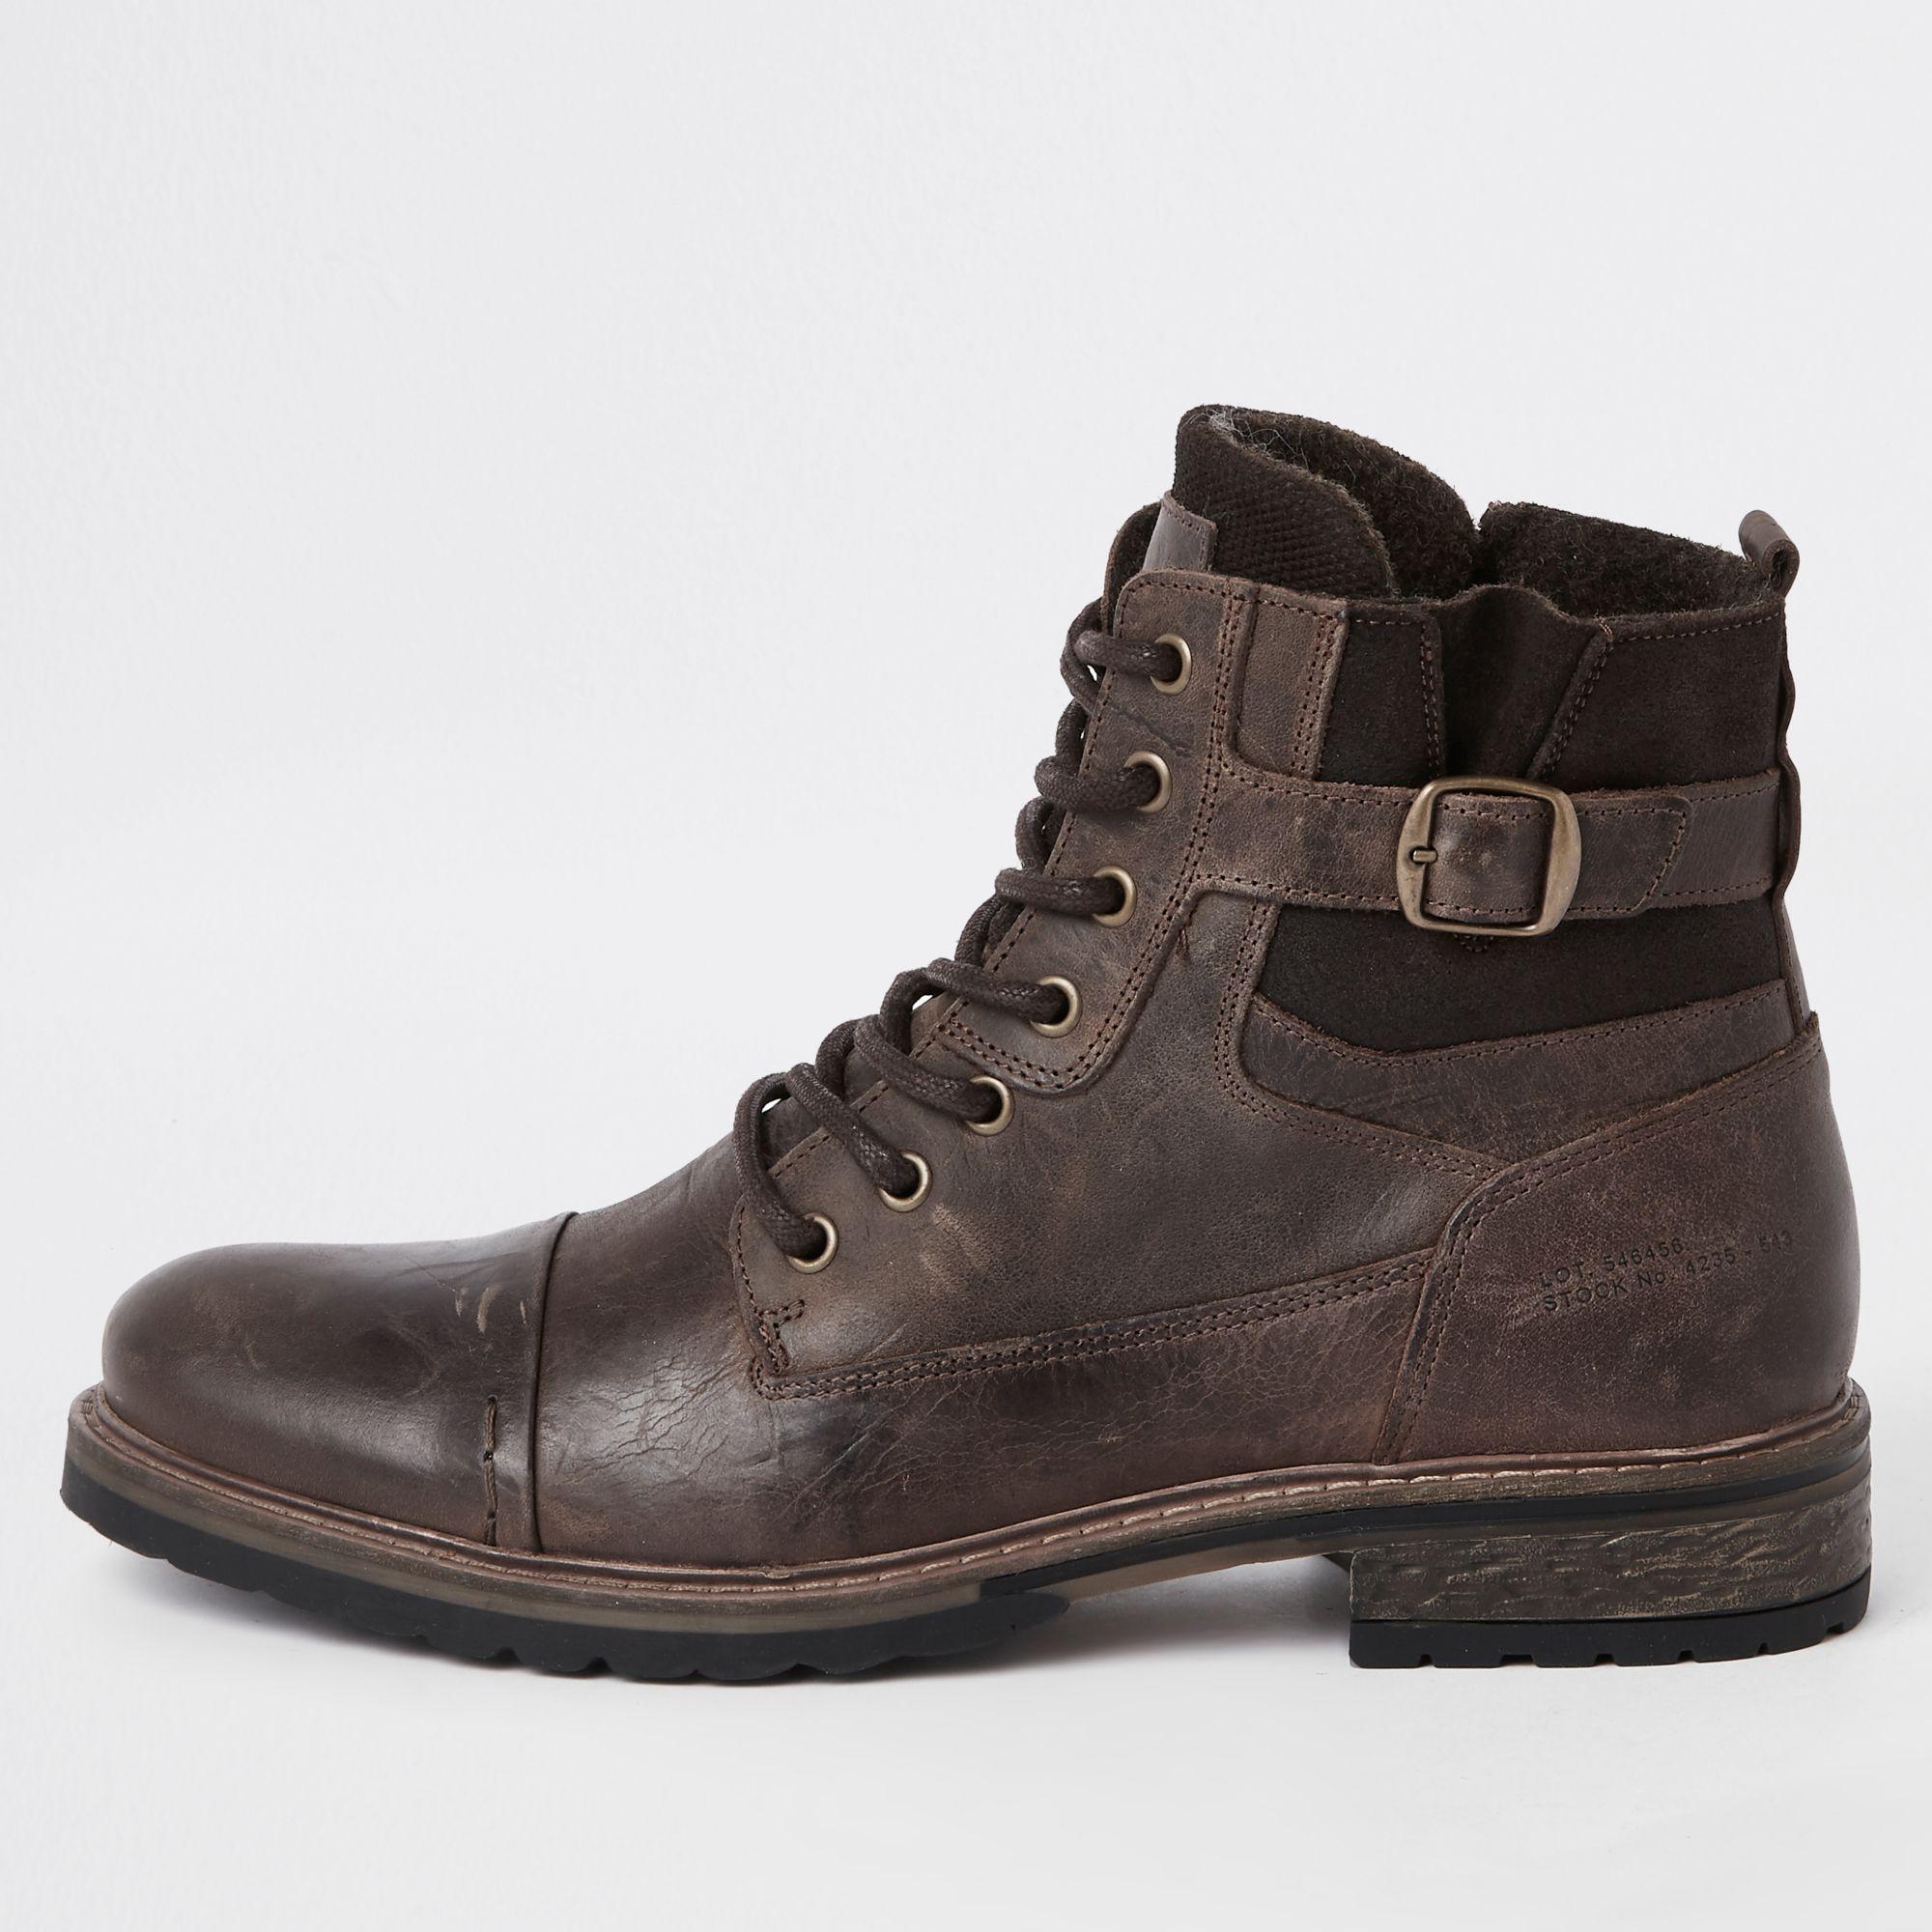 River Island Dark Buckle Lace-up Leather Boots in Brown for Men - Lyst